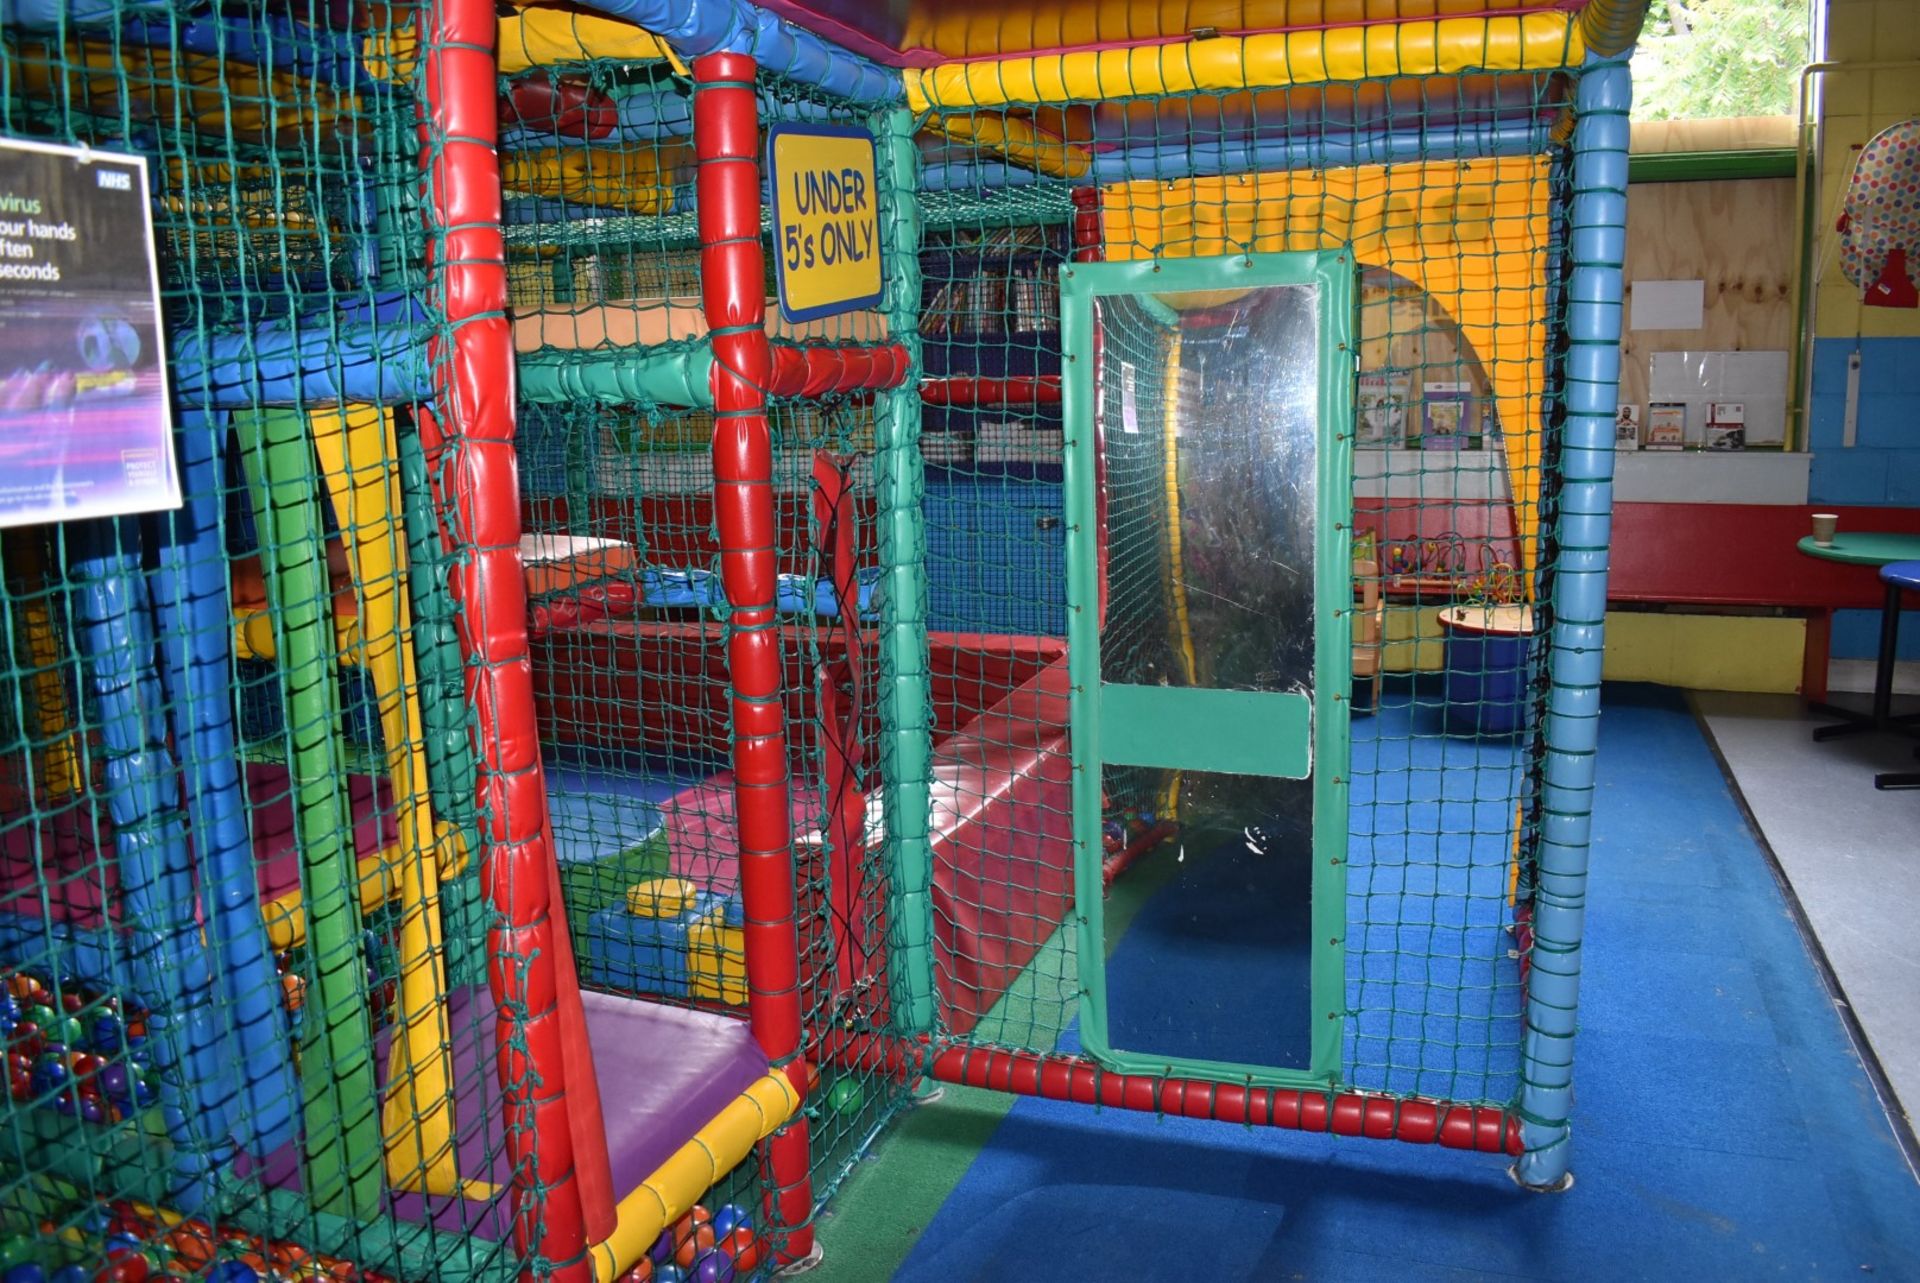 Bramleys Big Adventure Playground - Giant Action-Packed Playcentre With Slides, Zip Line Swings, - Image 27 of 128